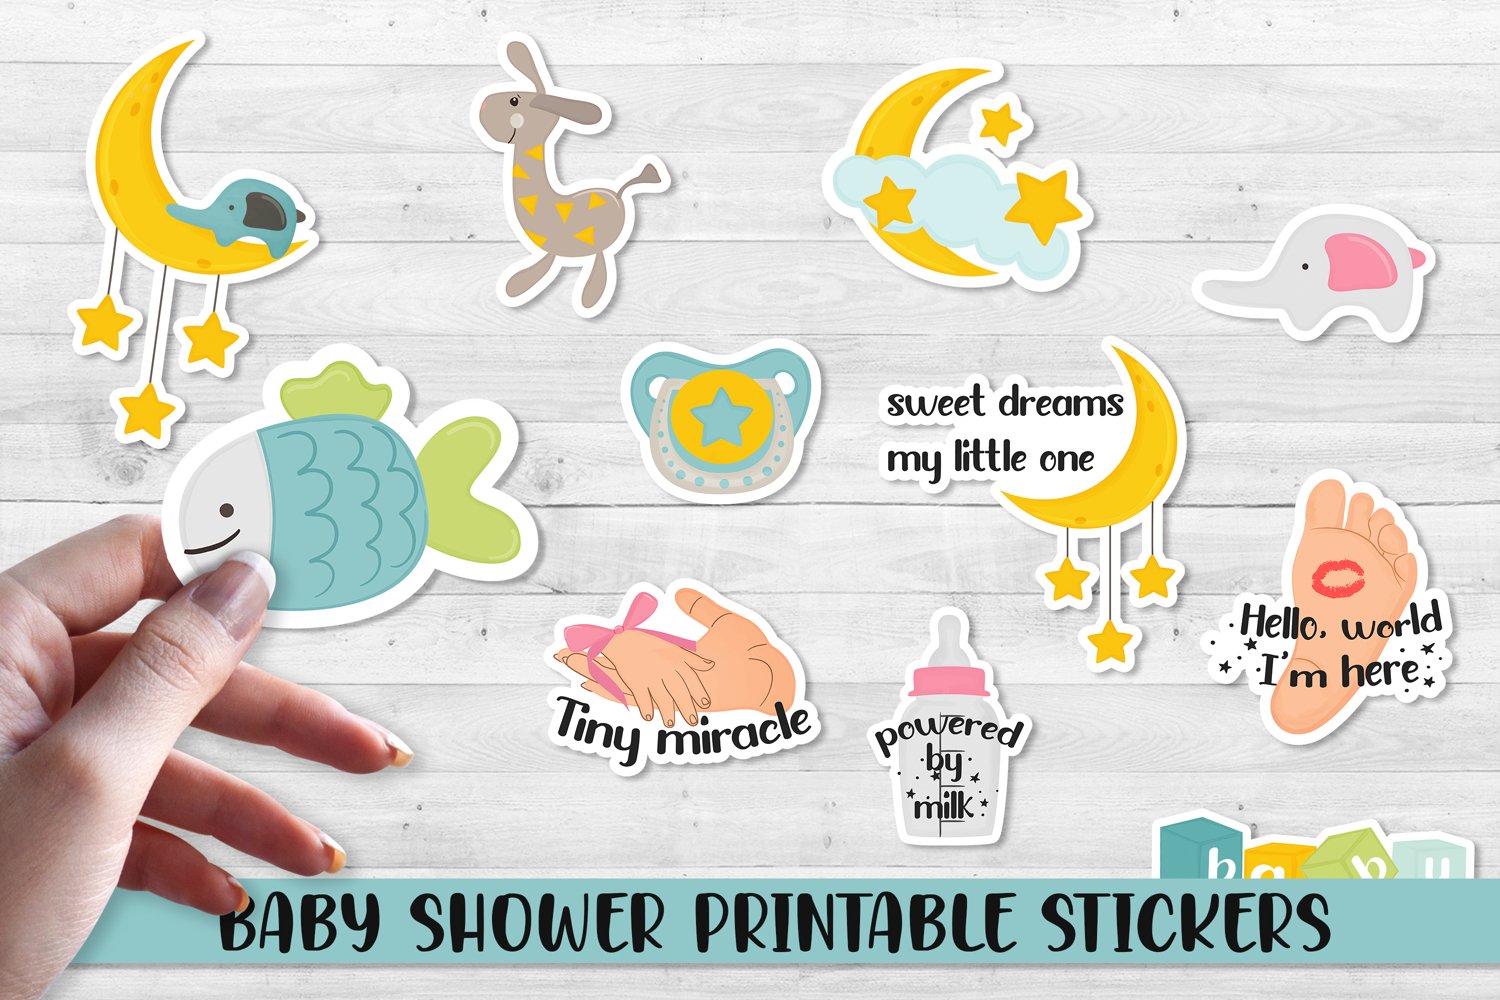 Baby shower printable stickers.